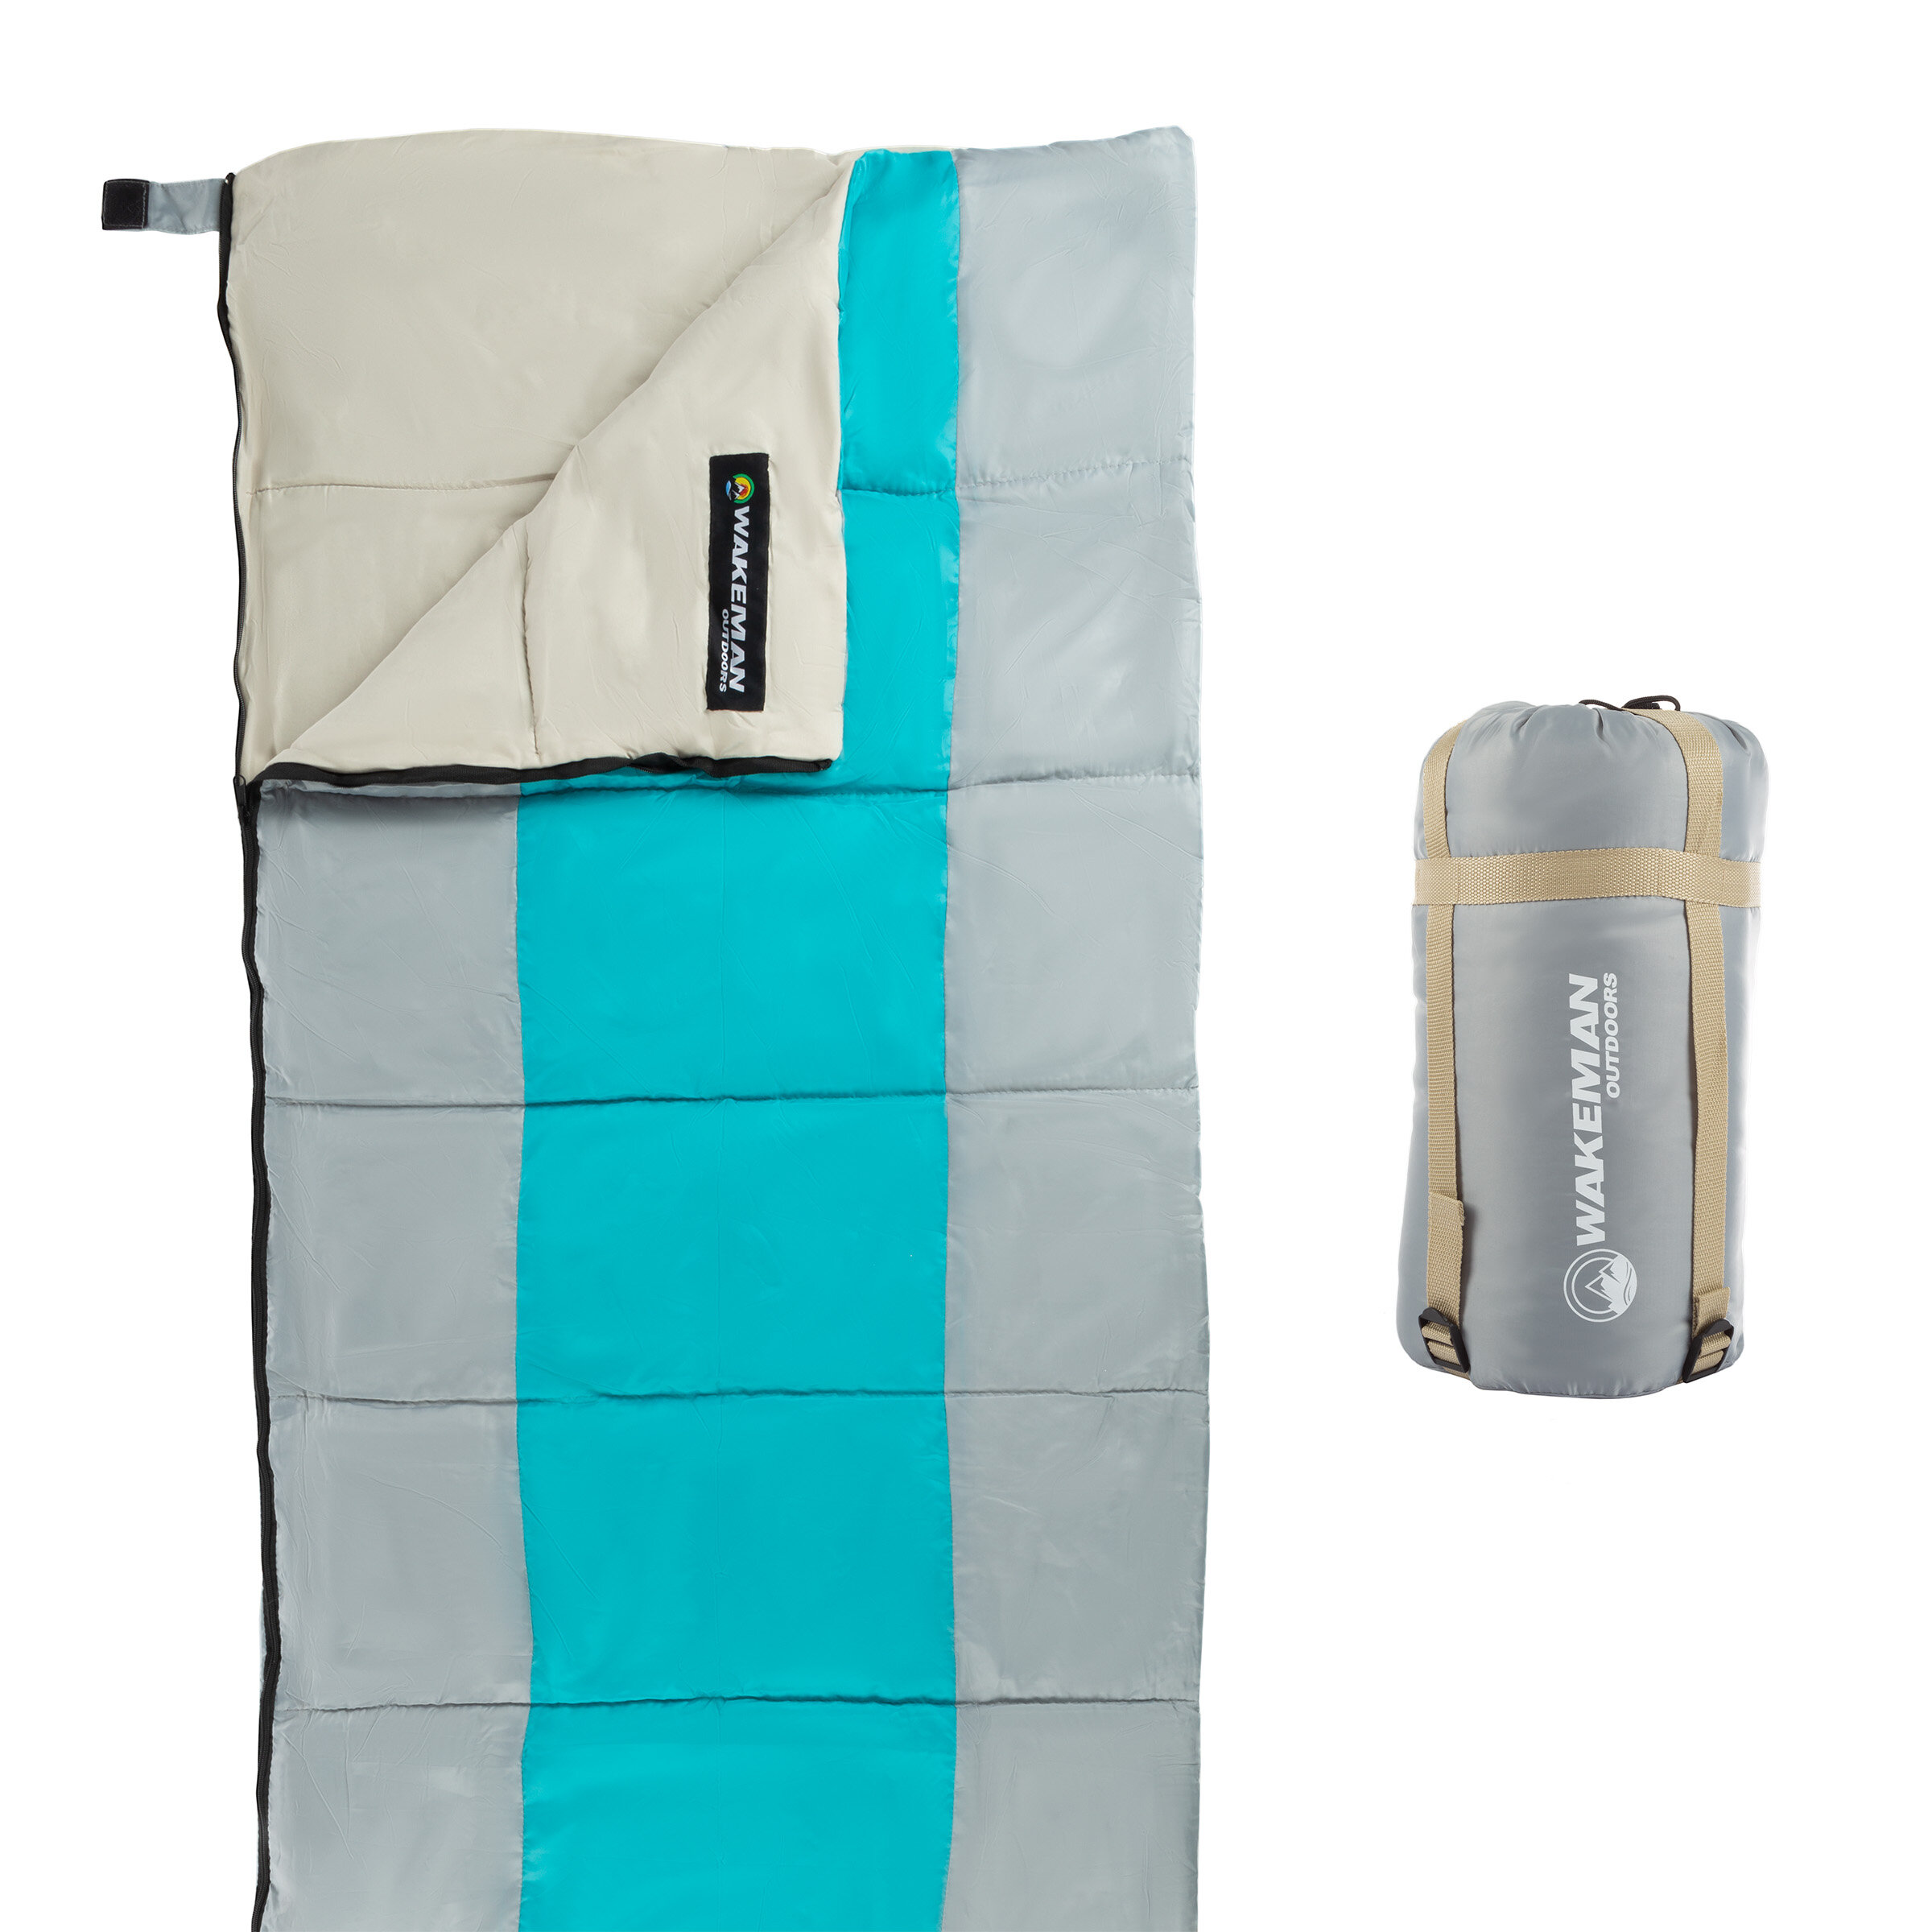 wakeman Lightweight Sleeping Bag - Carrying Bag with Compression Straps -  For Camping by Wakeman Outdoors & Reviews